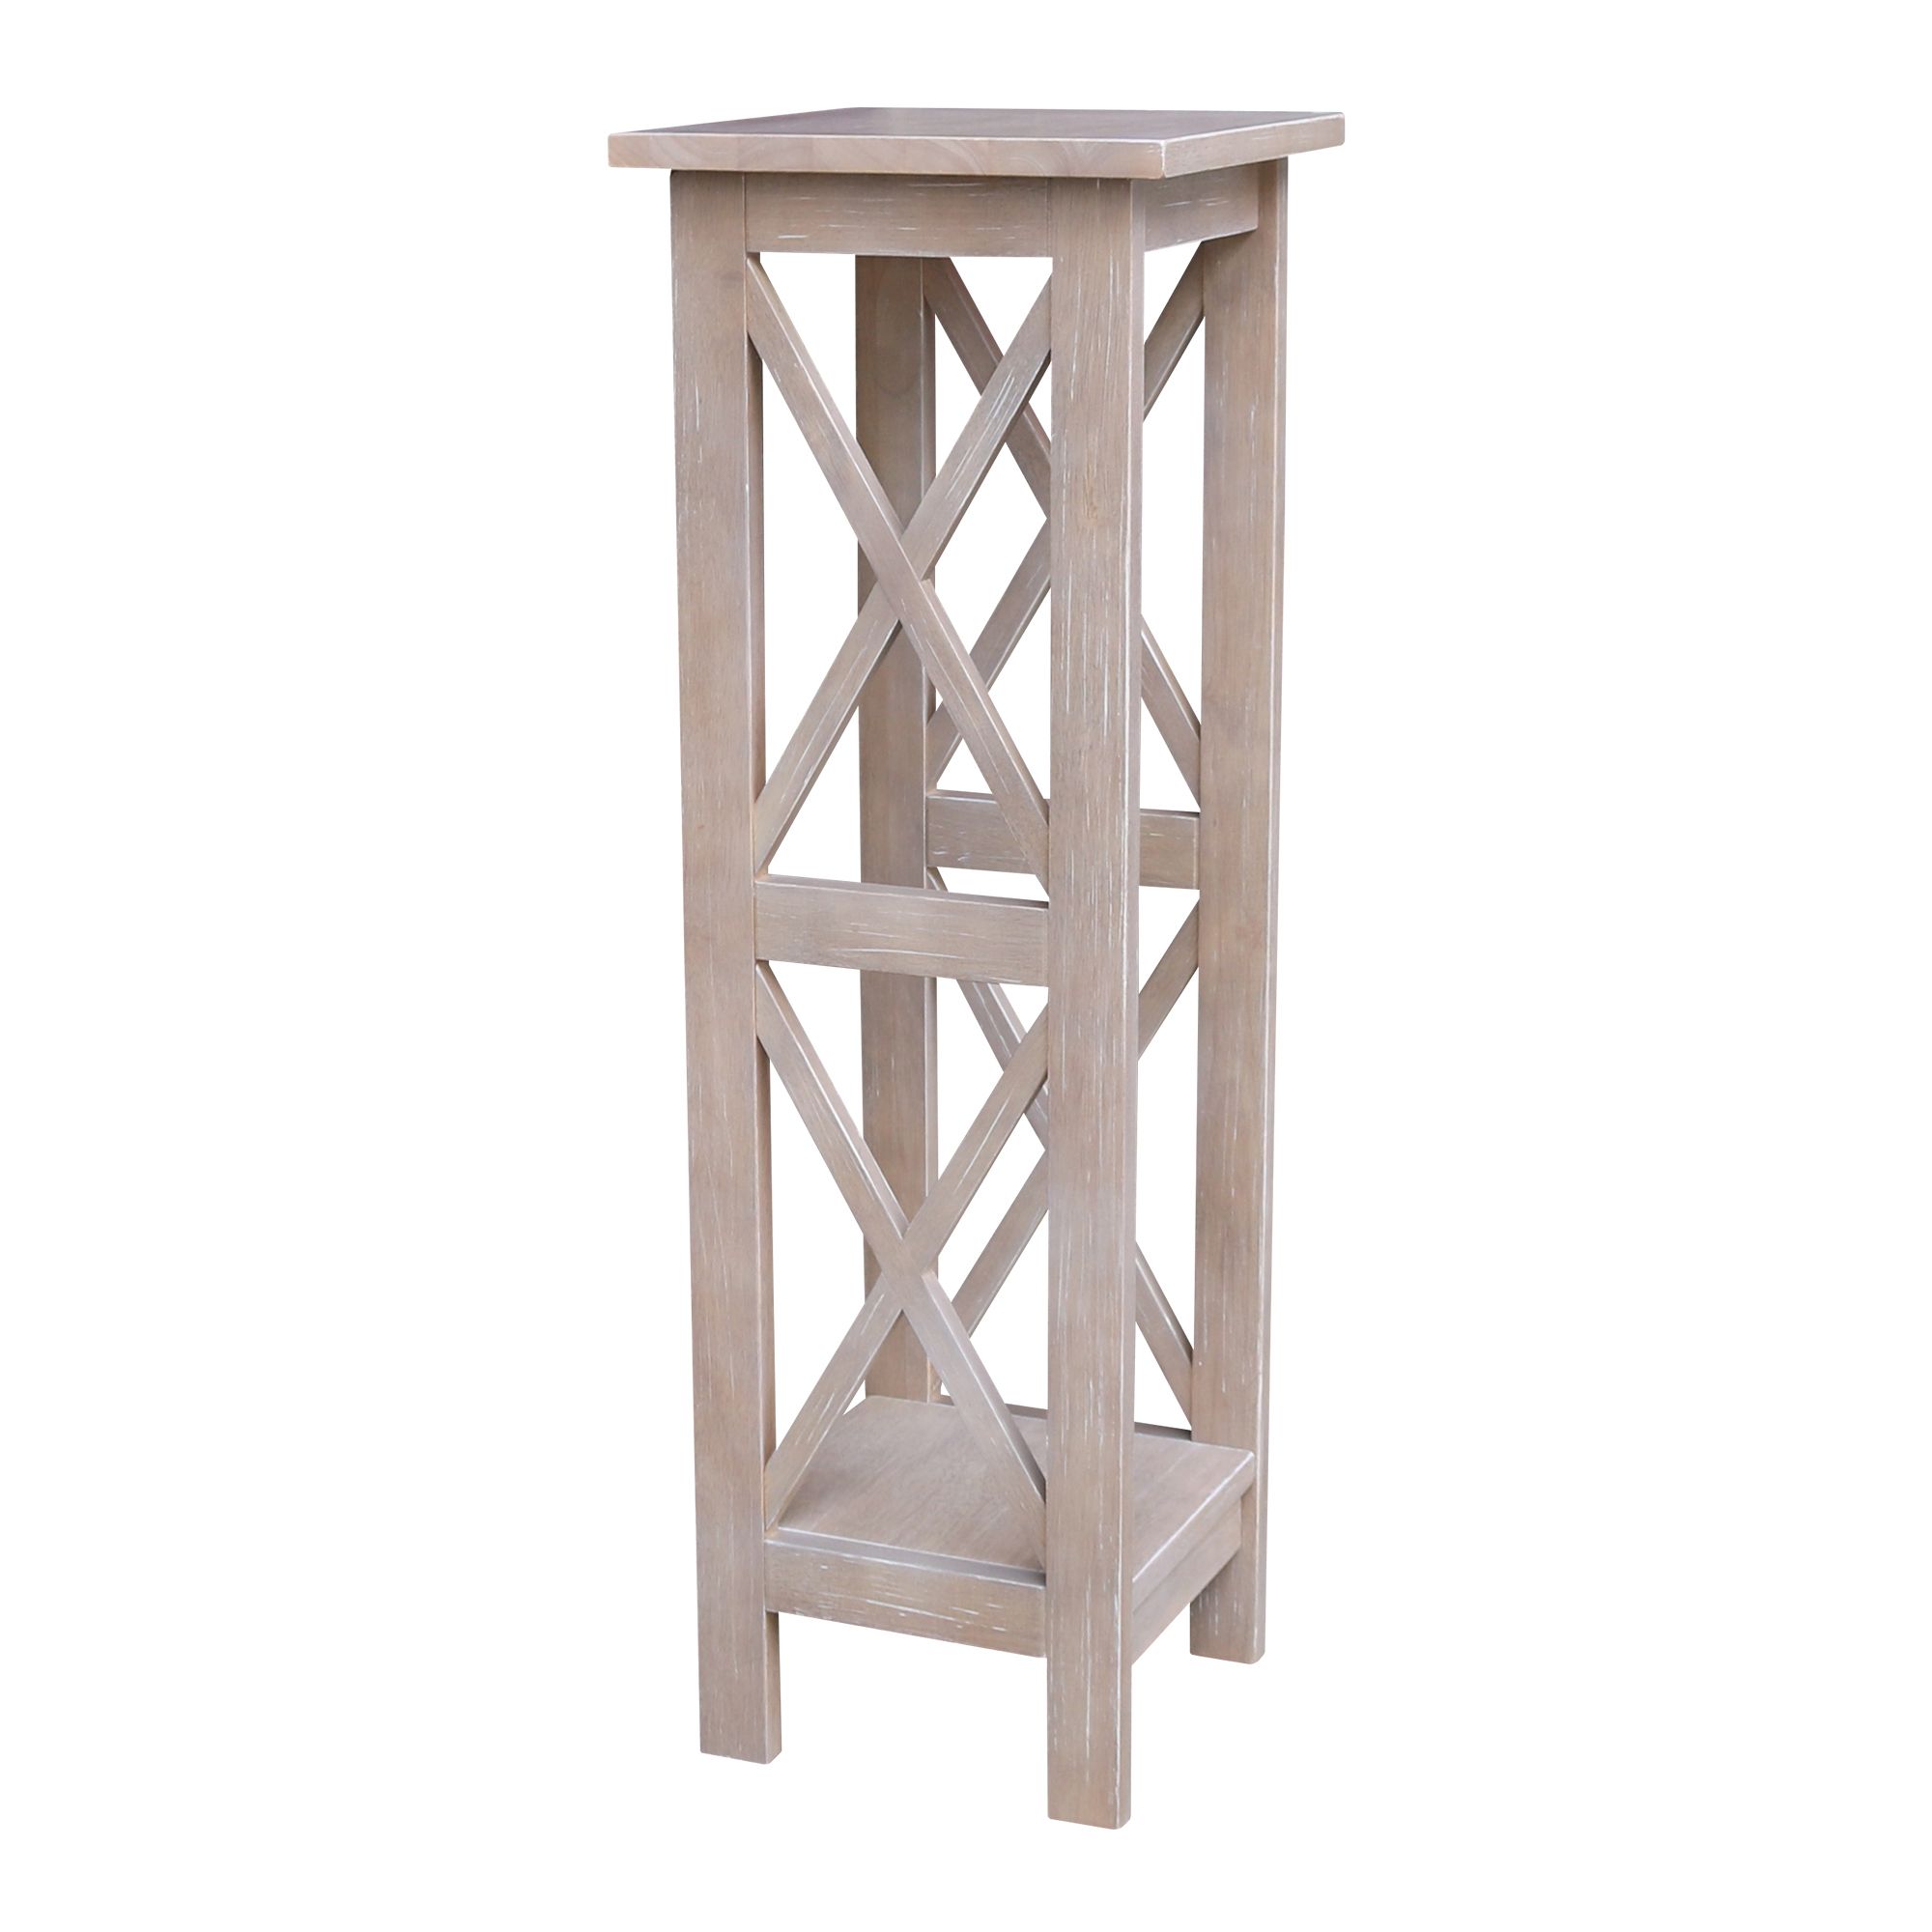 Solid Wood X Sided Plant Stand In Washed Gray Taupe – Walmart Regarding 2019 Weathered Gray Plant Stands (View 8 of 10)